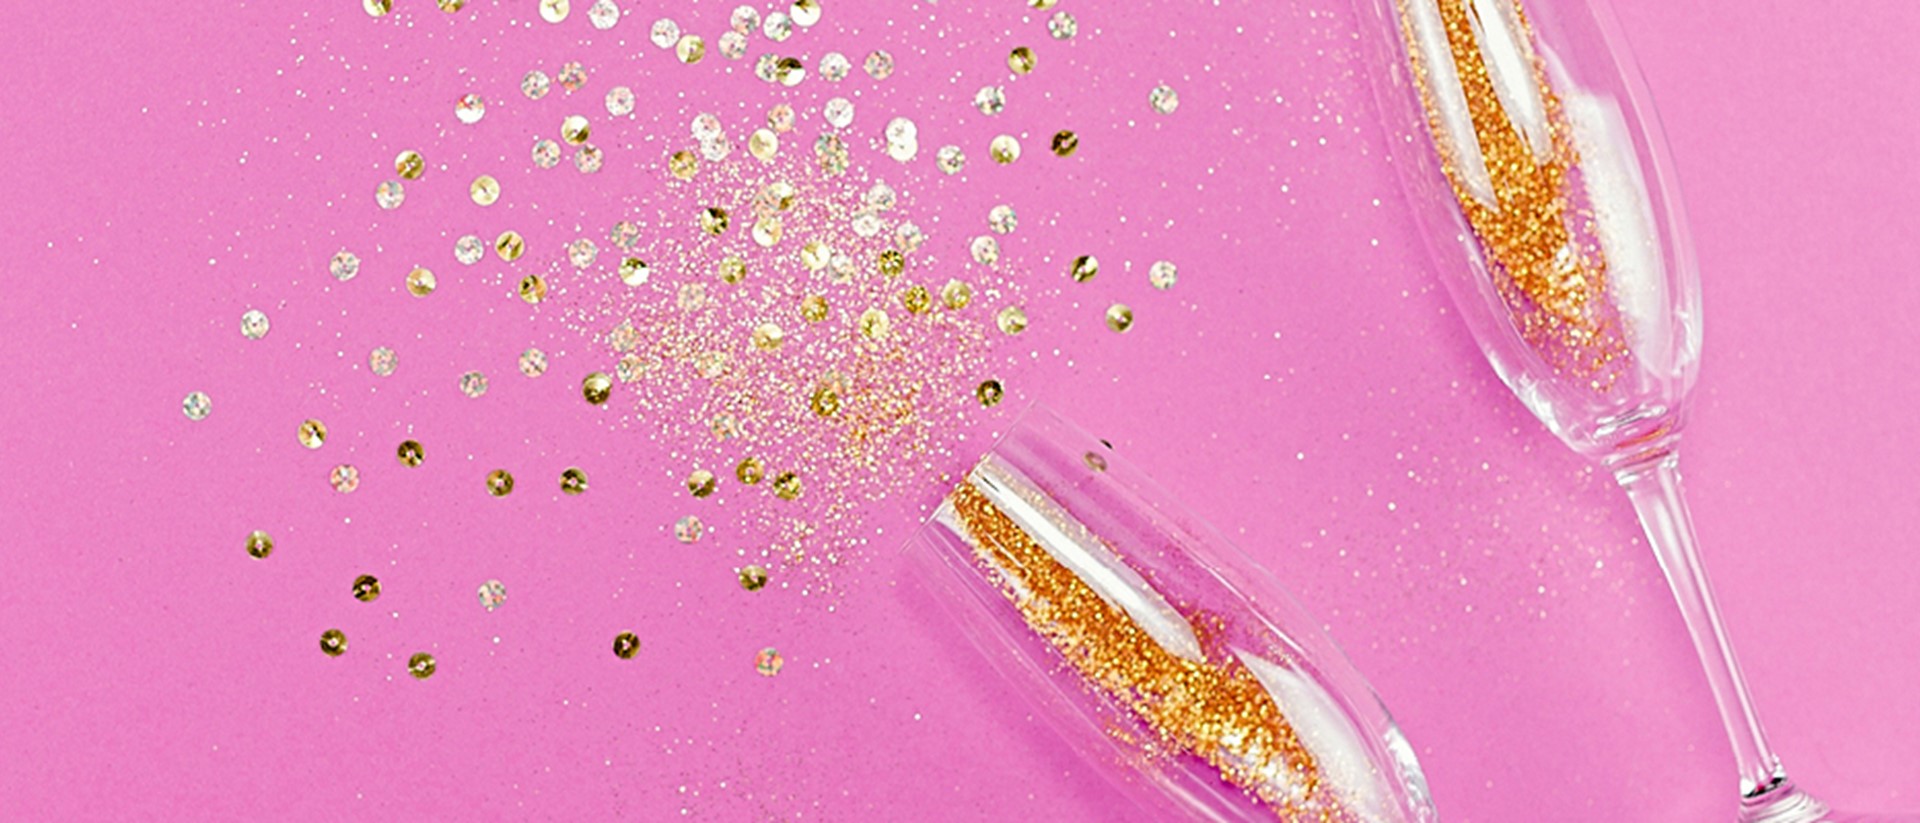 Image of two champagnes flutes with glitter on a pink background